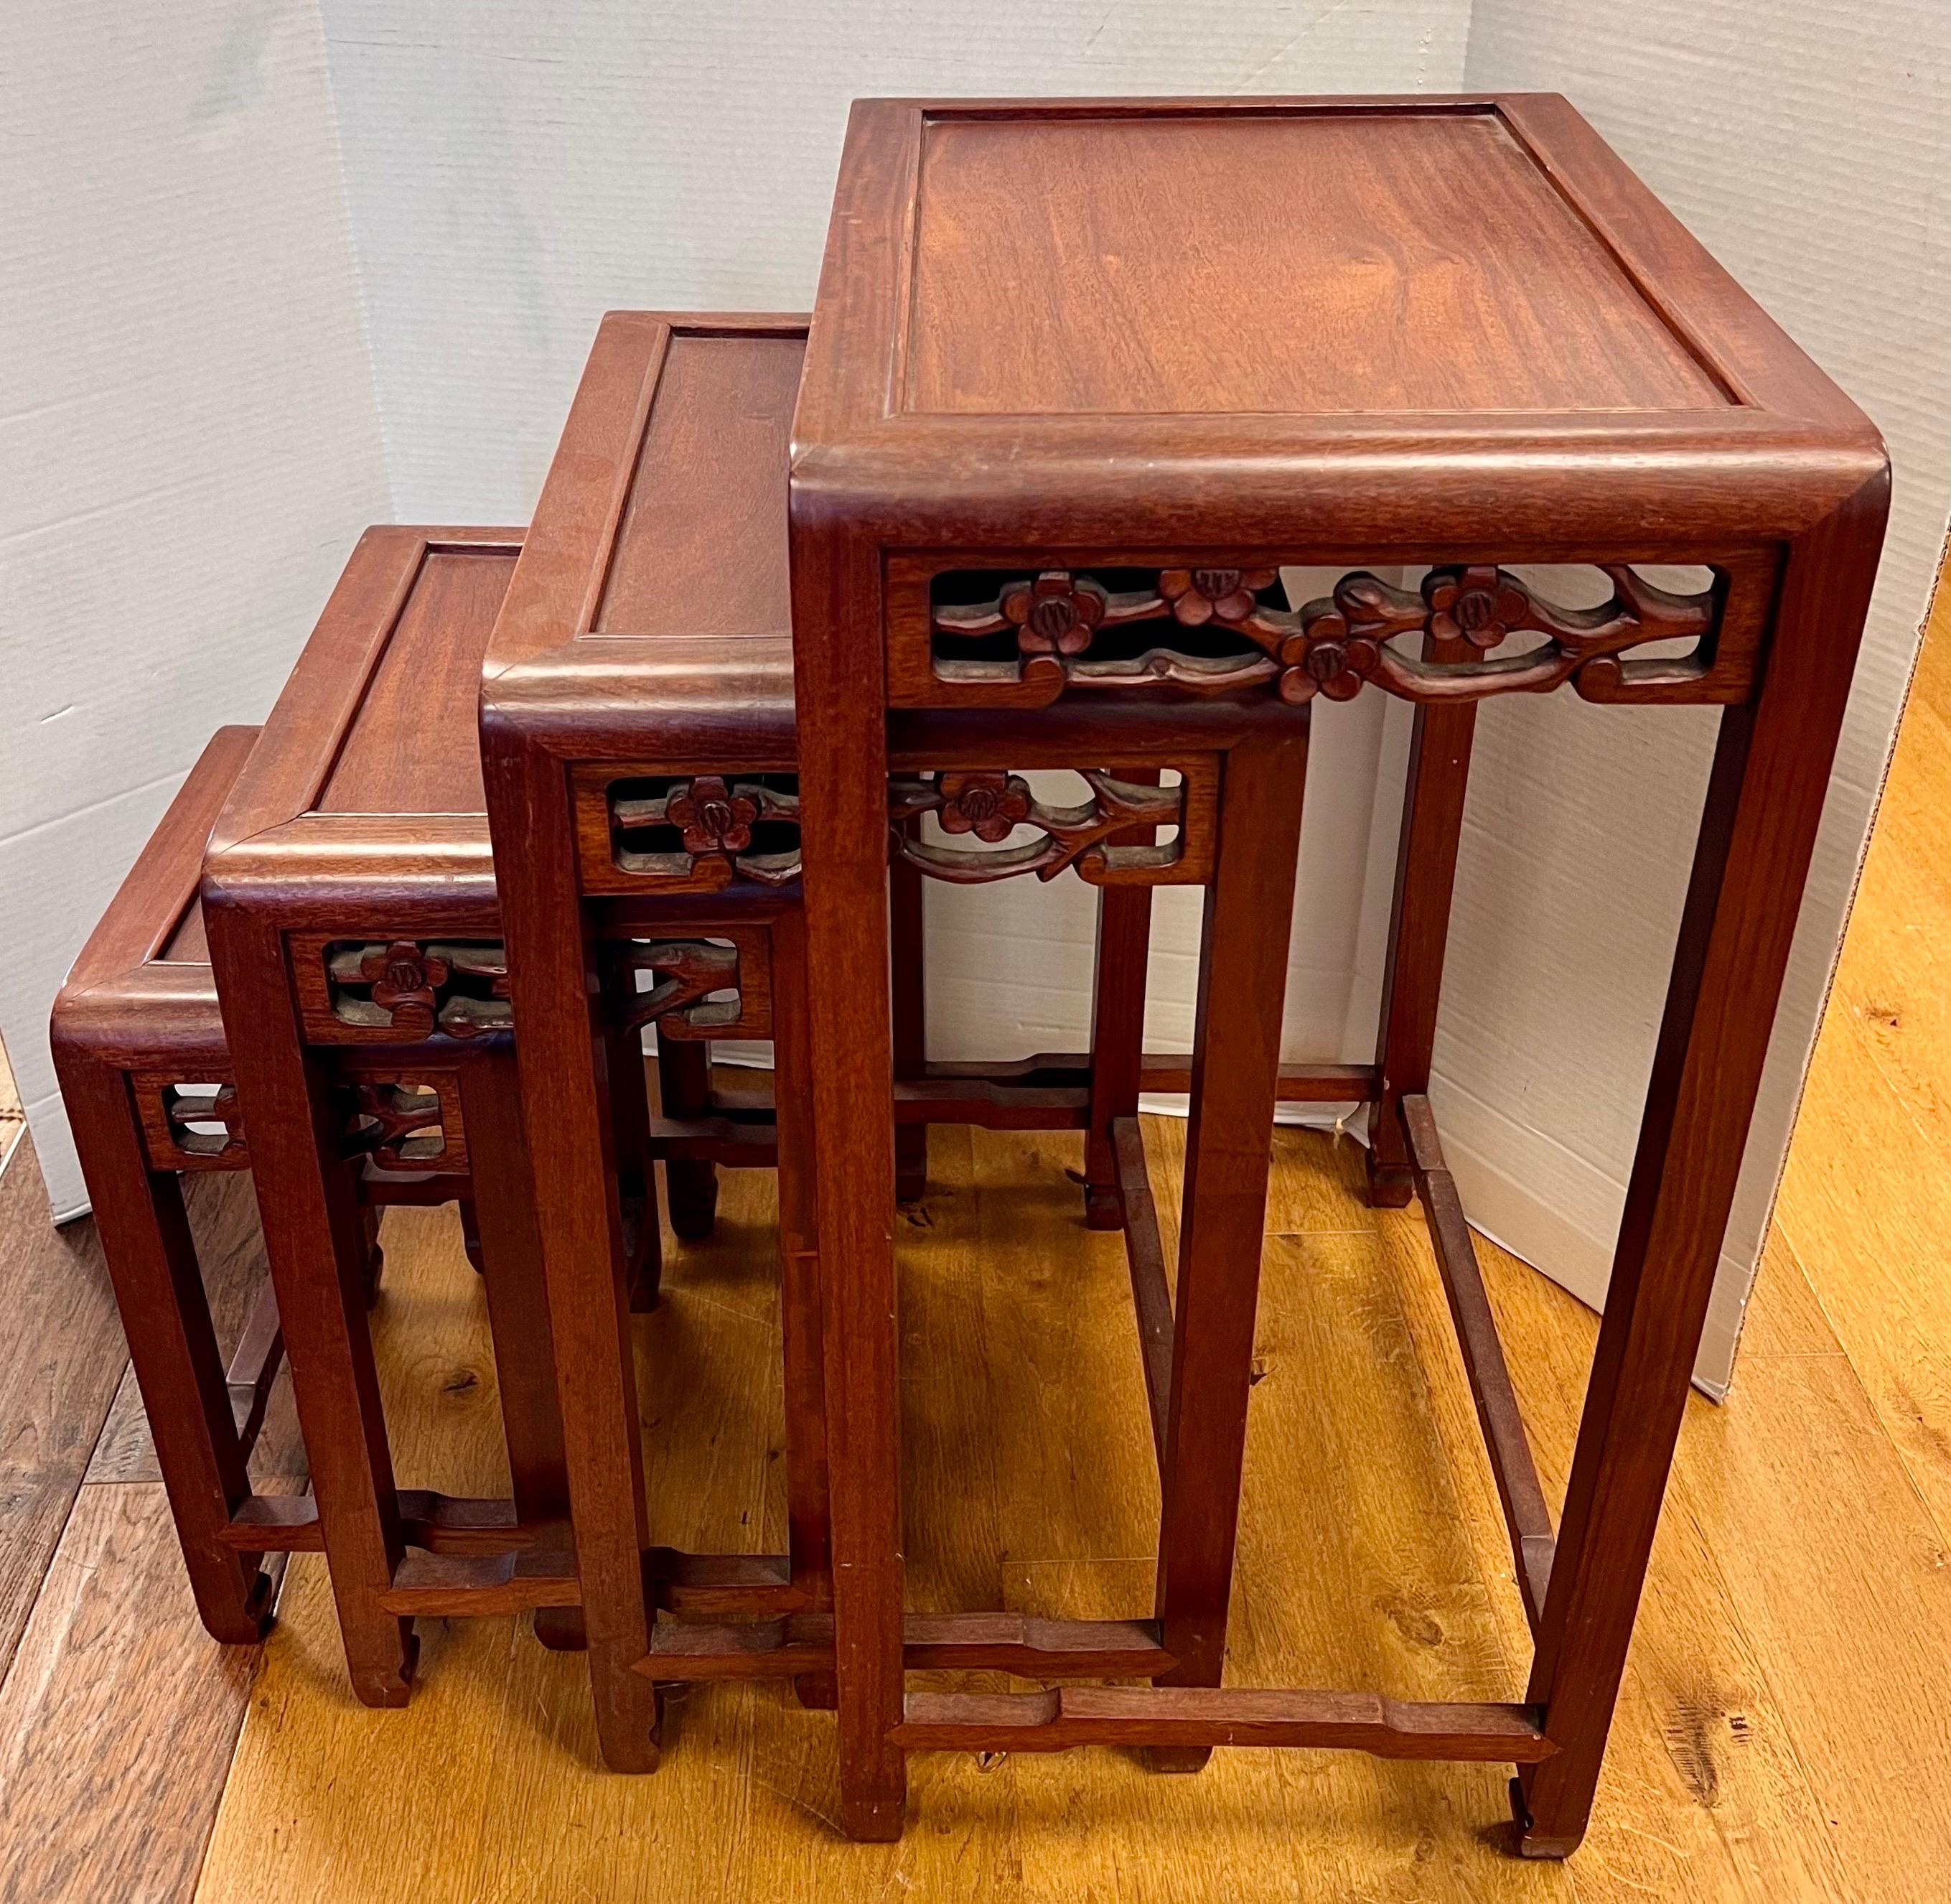 Set of 4 Chinese Asian Carved Nesting Tables feature hand-carved details, showcasing the artistry and craftsmanship of Chinese design. Crafted with precision and care, these nesting tables effortlessly combine functionality and beauty, allowing you